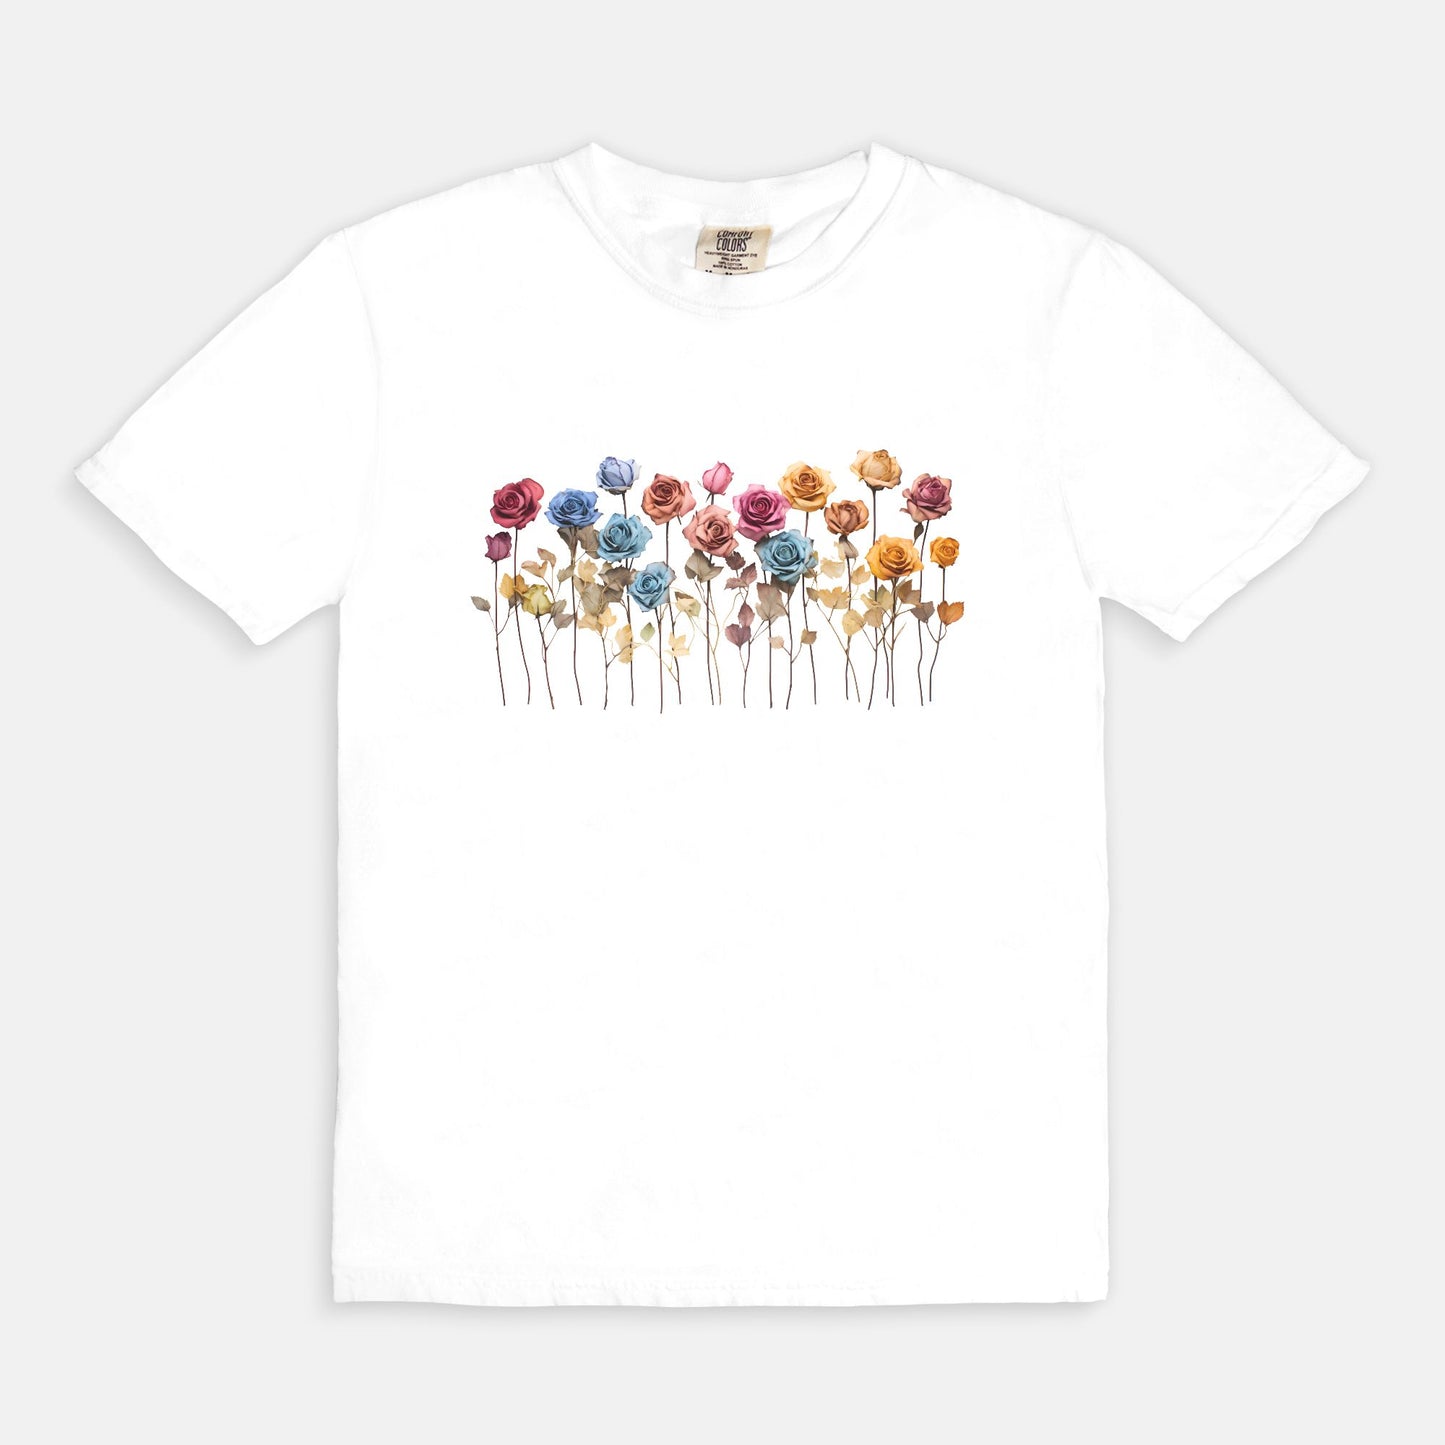 Flower Boho Wildflowers Comfortable Tee is free-spirited charm with our unique designs by Sorcery Soap + Hocus Pocus Craft